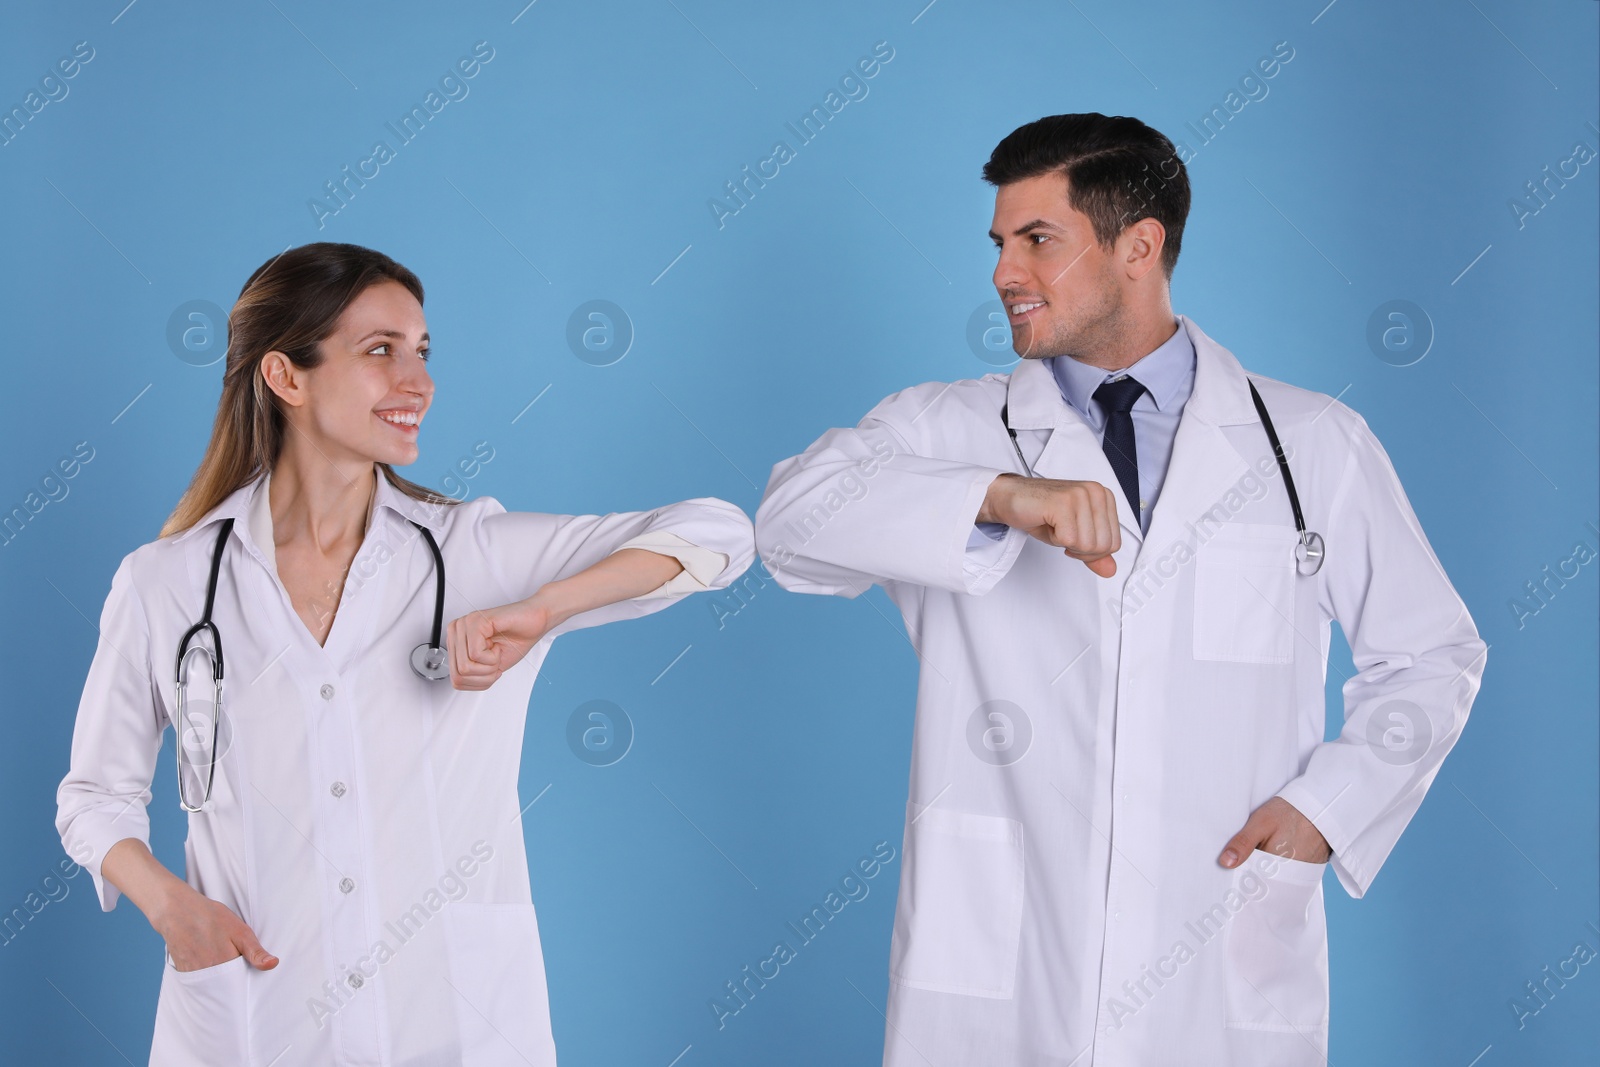 Photo of Doctors greeting each other by bumping elbows instead of handshake on light blue background